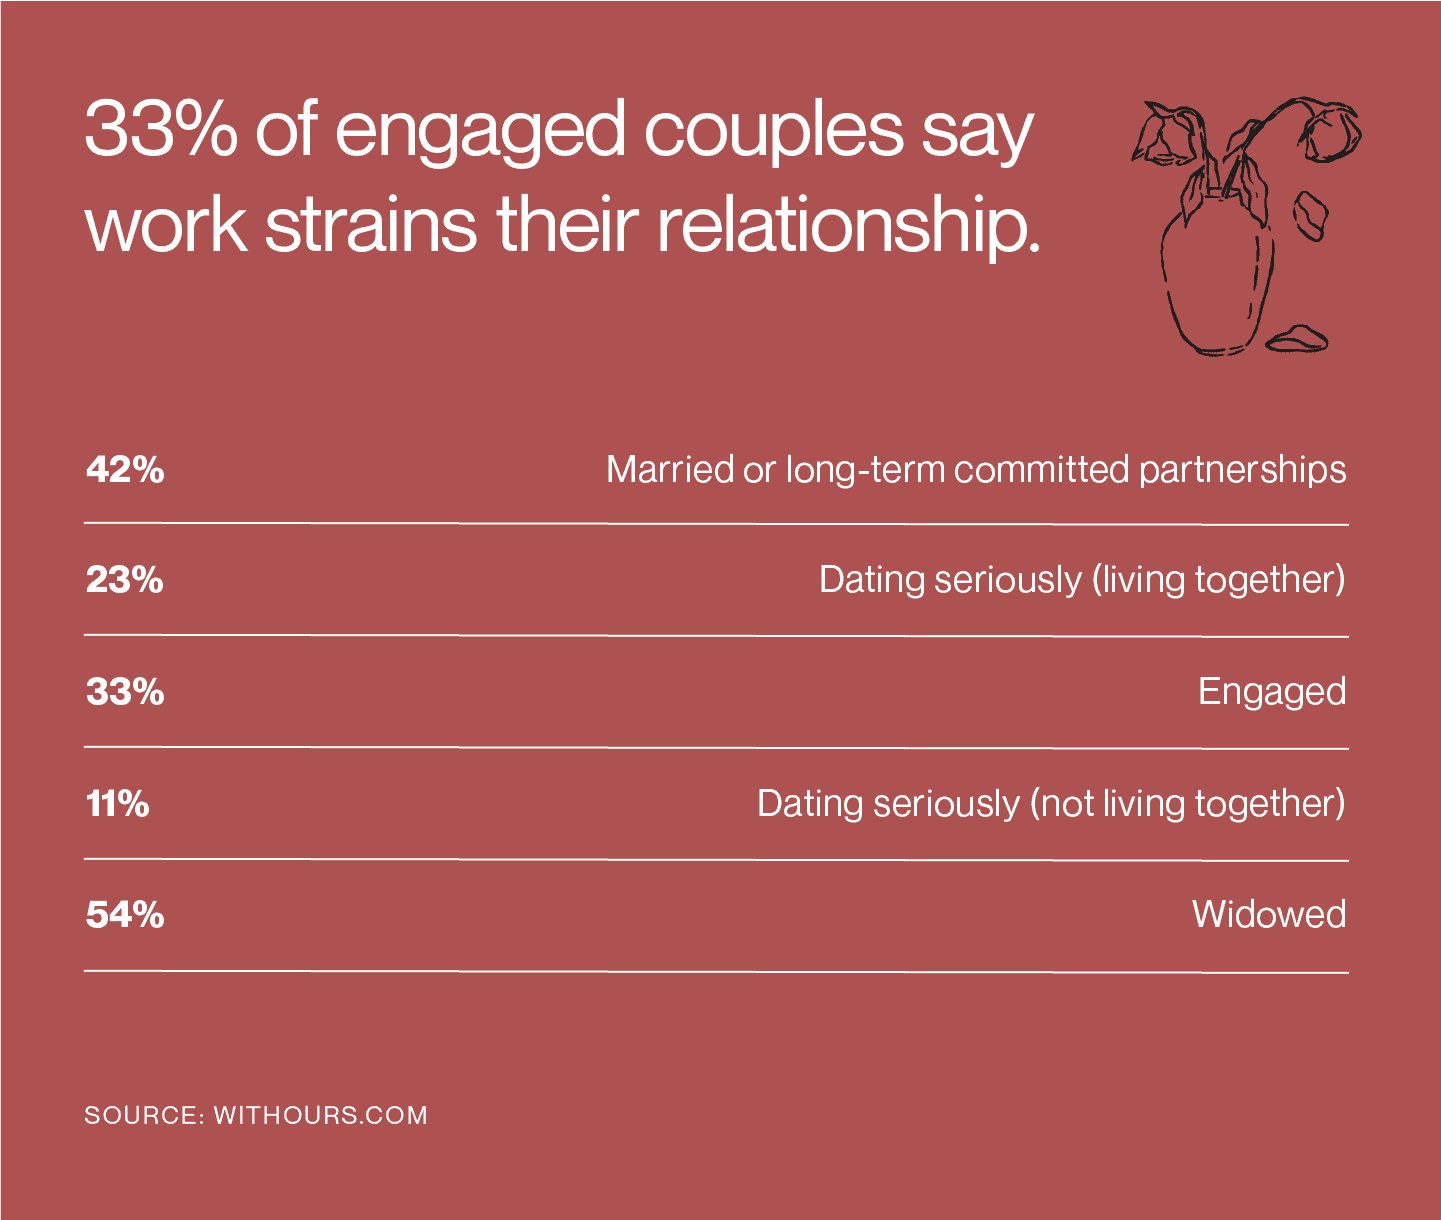 Most people agree they perform better at work when their relationship is healthy.